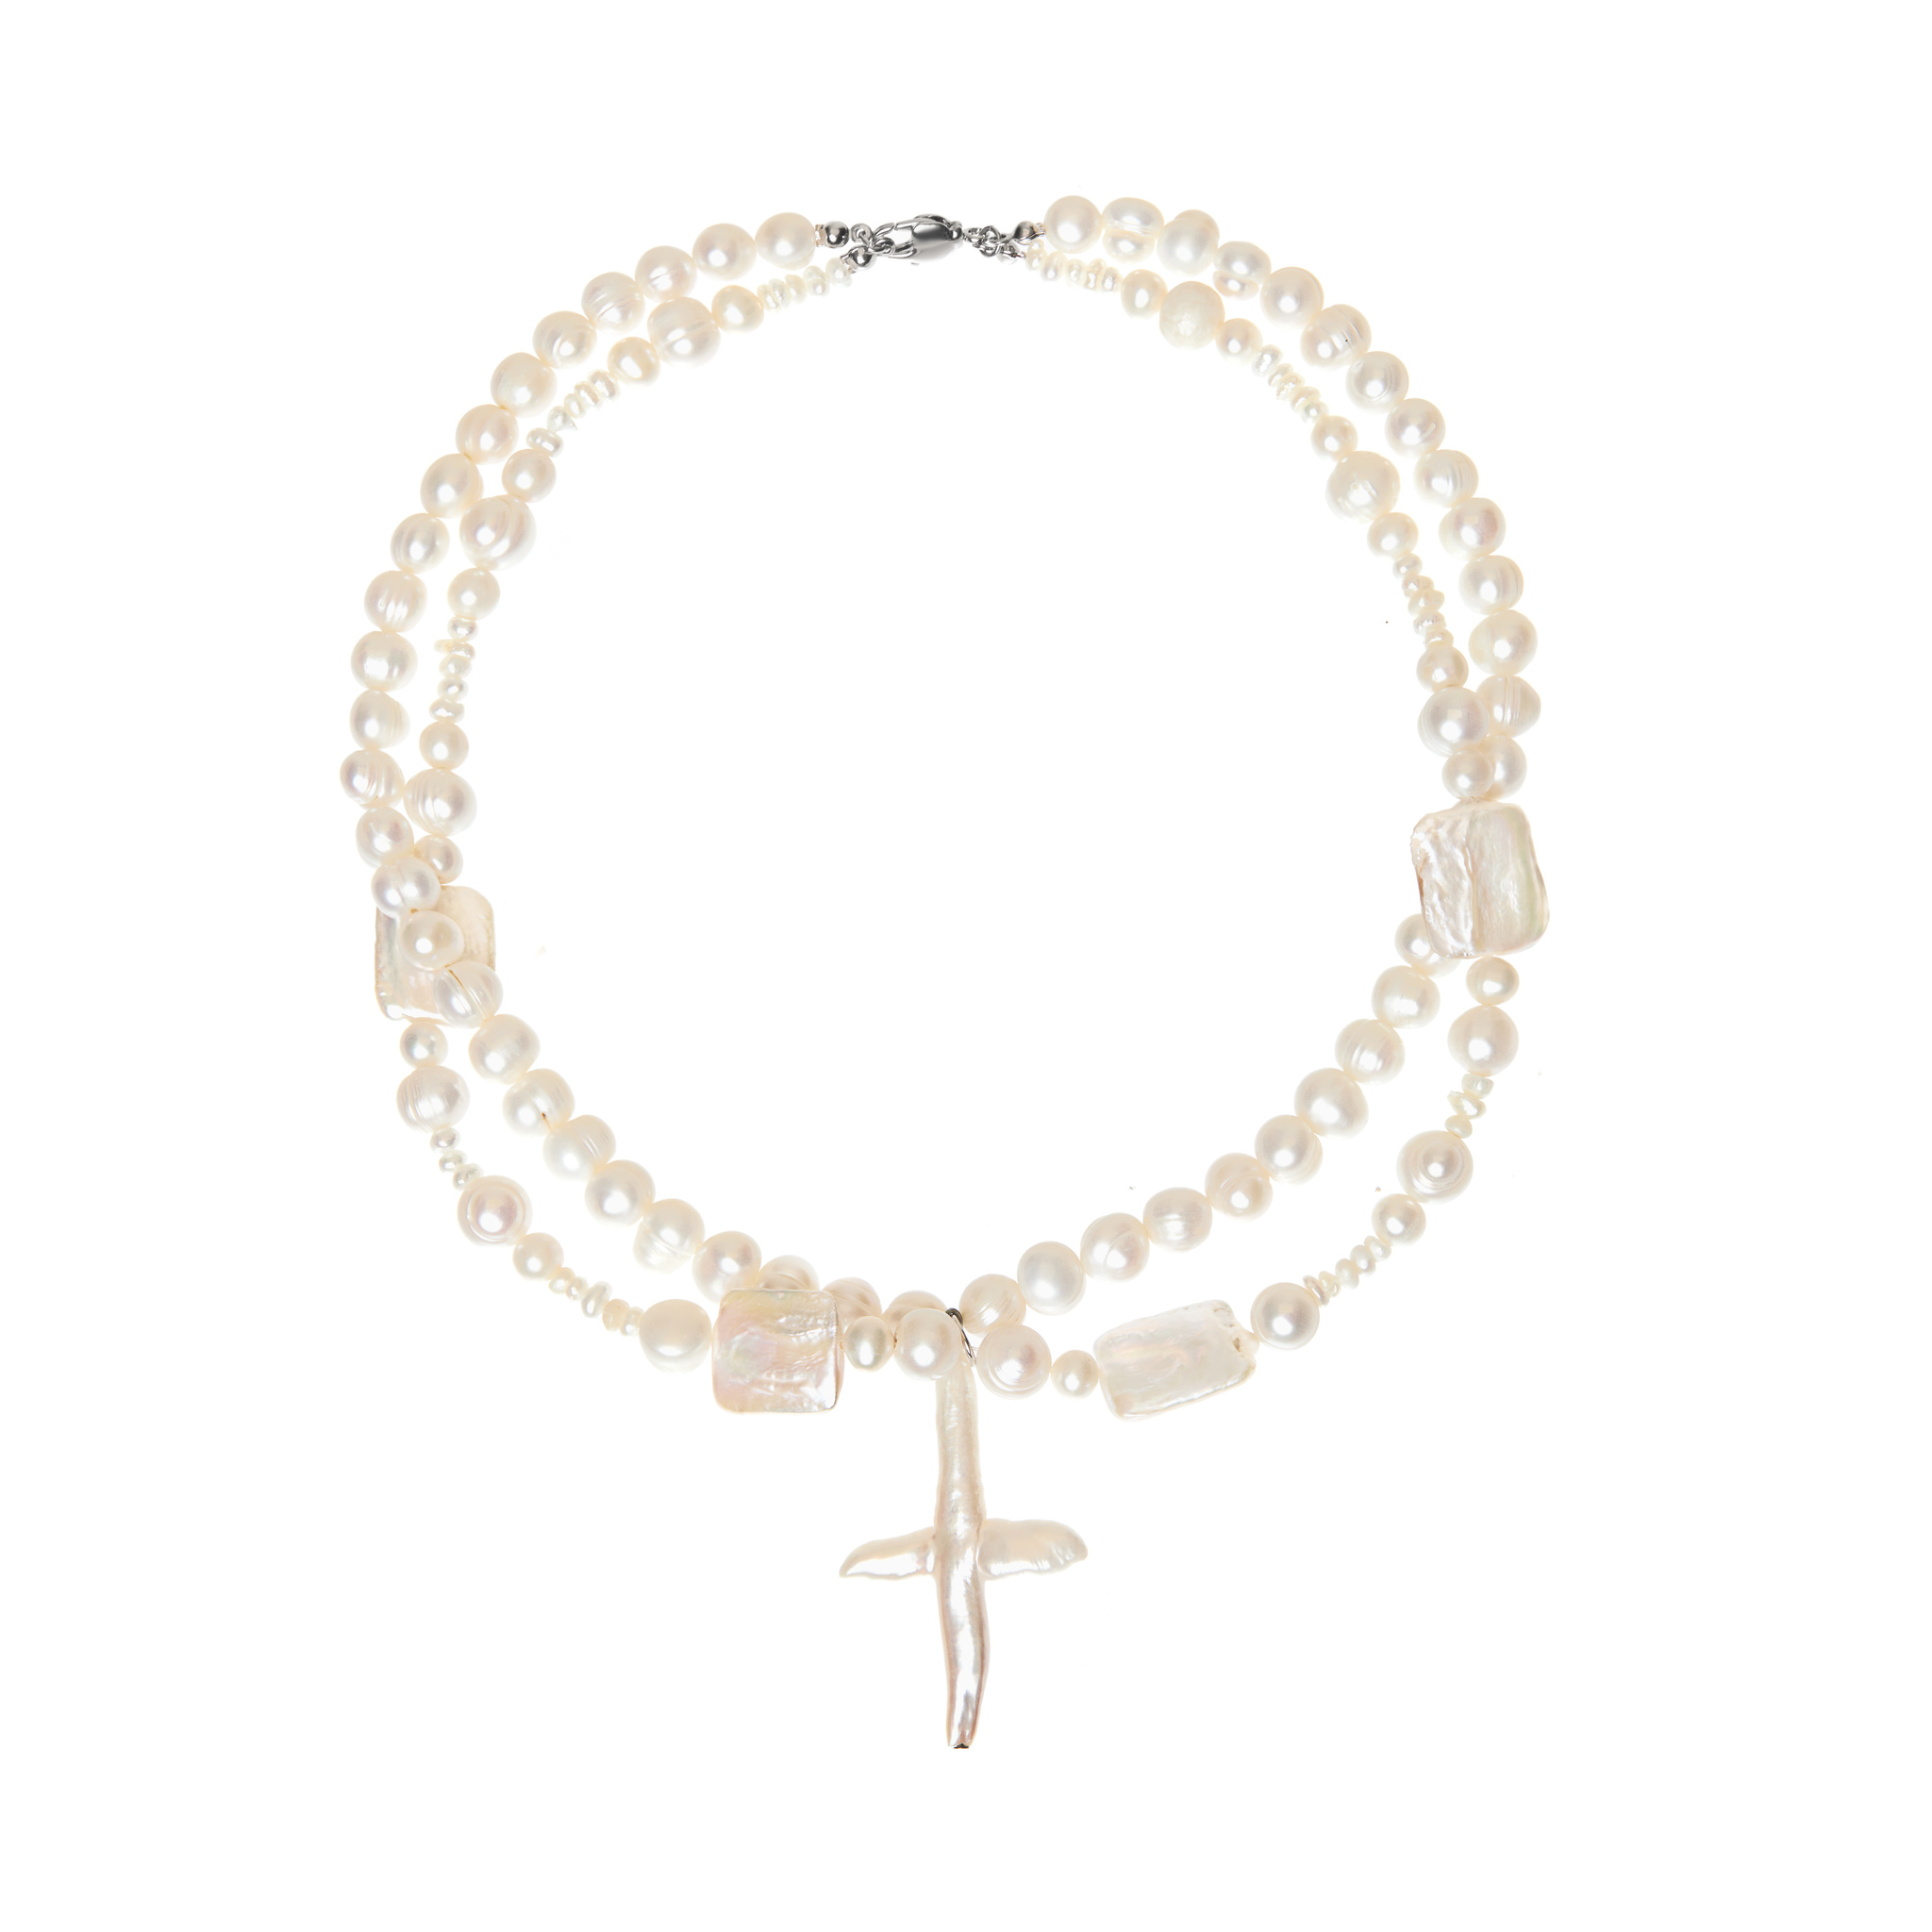 HOLLY JUNE Колье Pearly Abundance Cross Necklace – Nacre holly june брошь pearly pin brooch